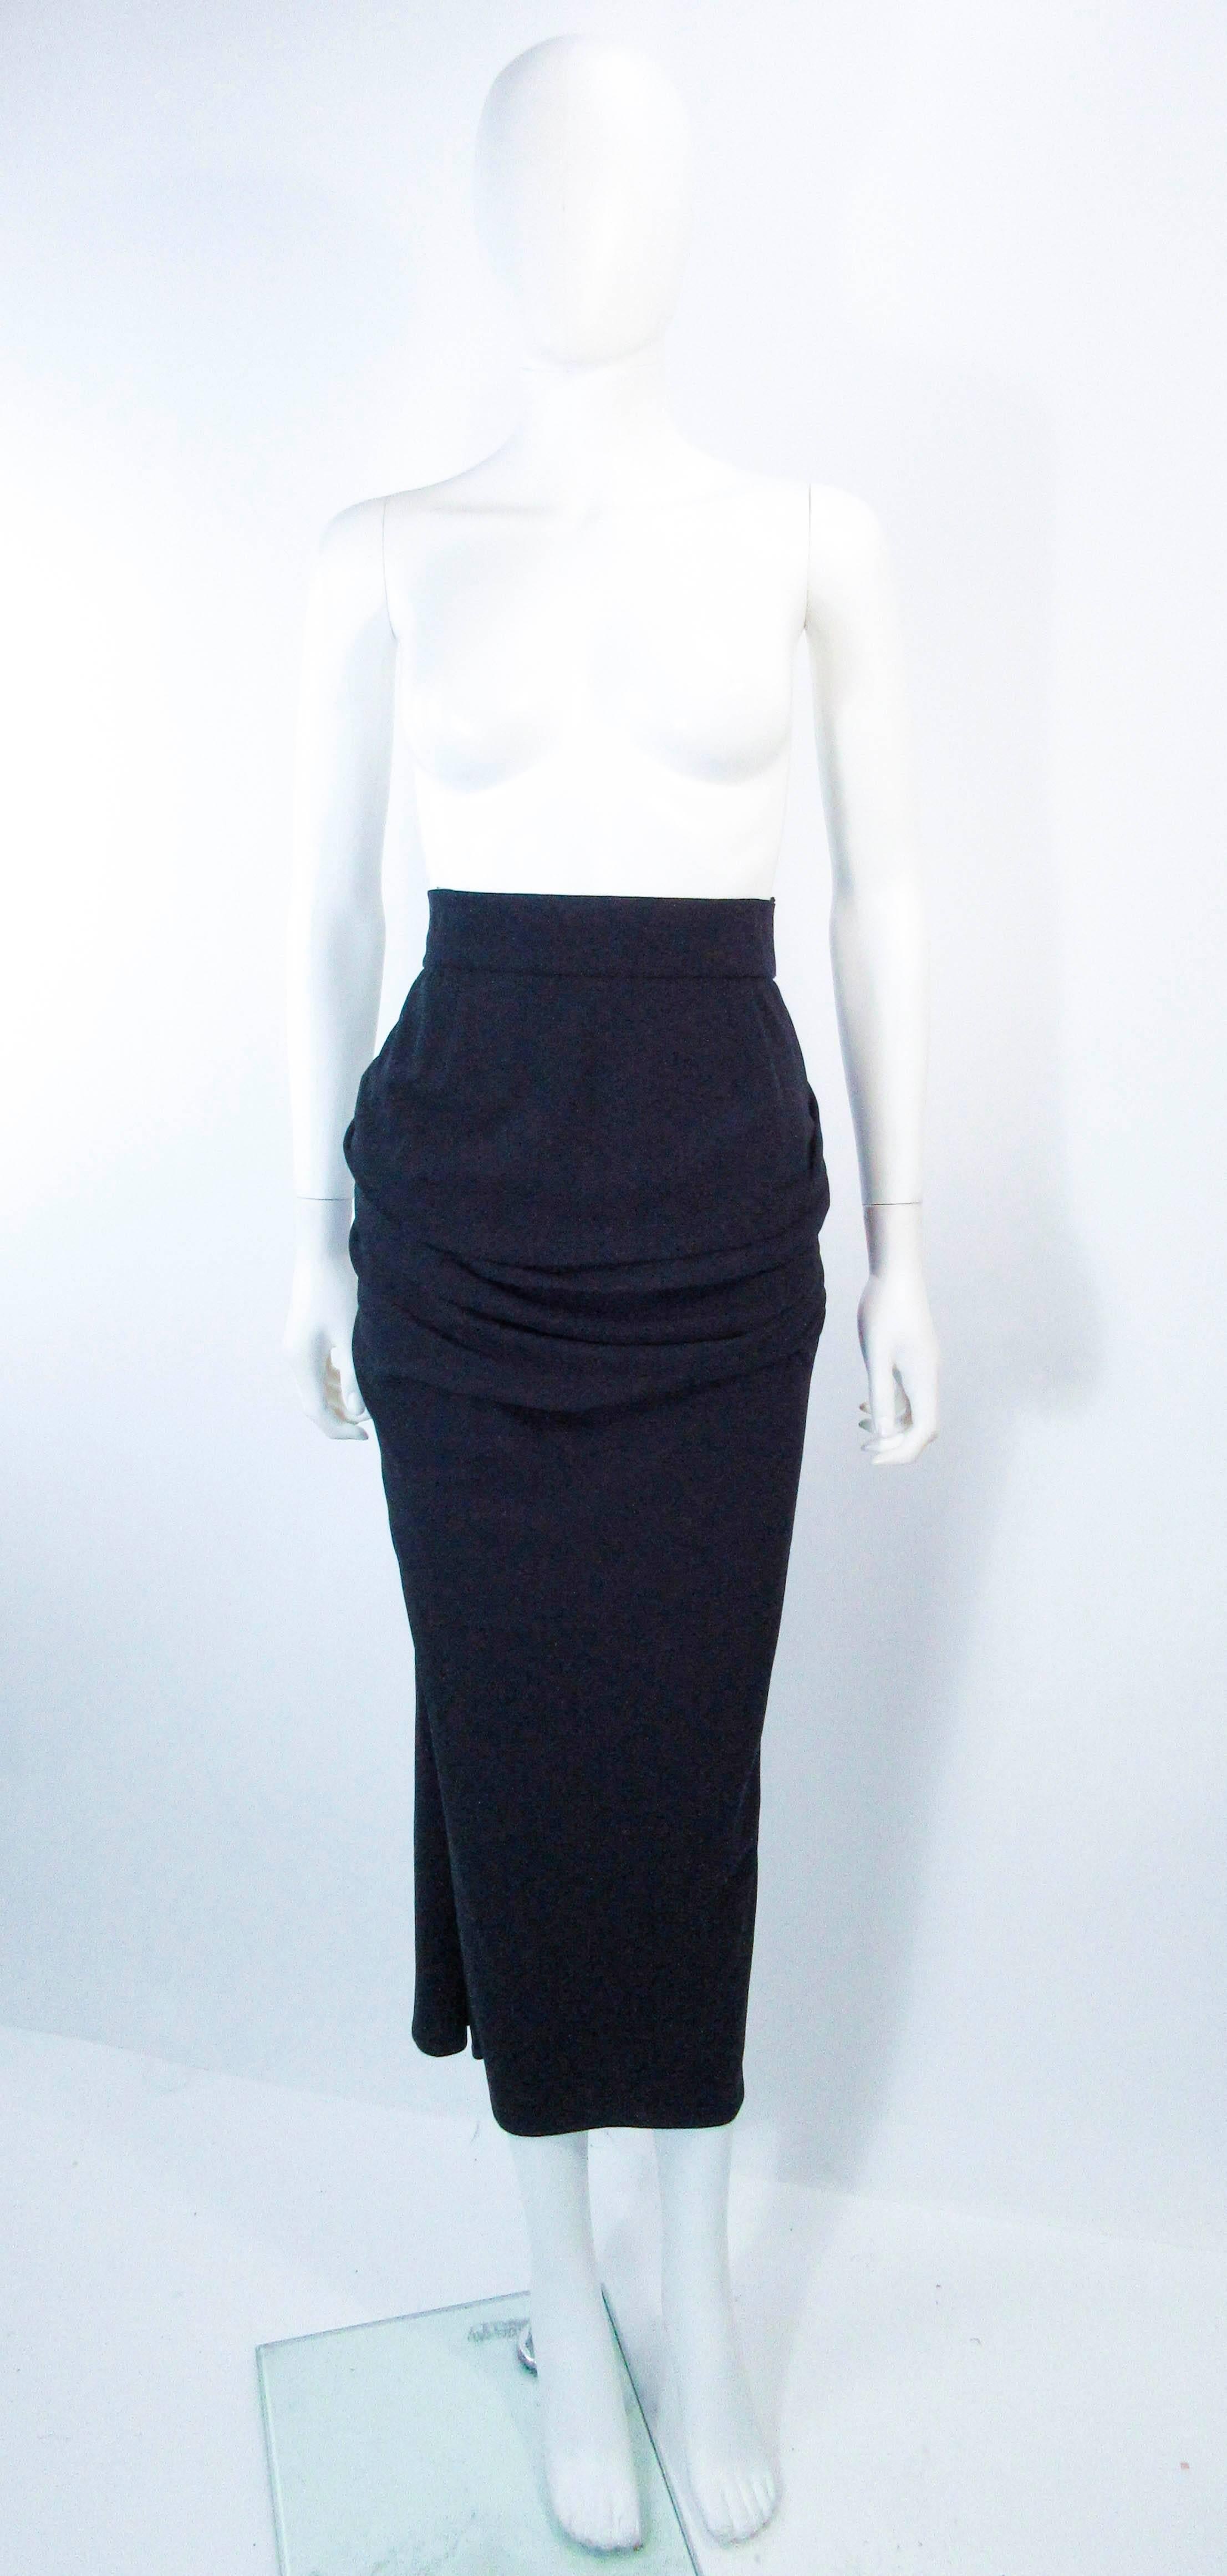 This vintage skirt is composed of a black silk matte jersey features a gorgeous gather with center back cascading drape. This is an absolutely striking design. In overall good vintage condition.

**Please cross-reference measurements for personal